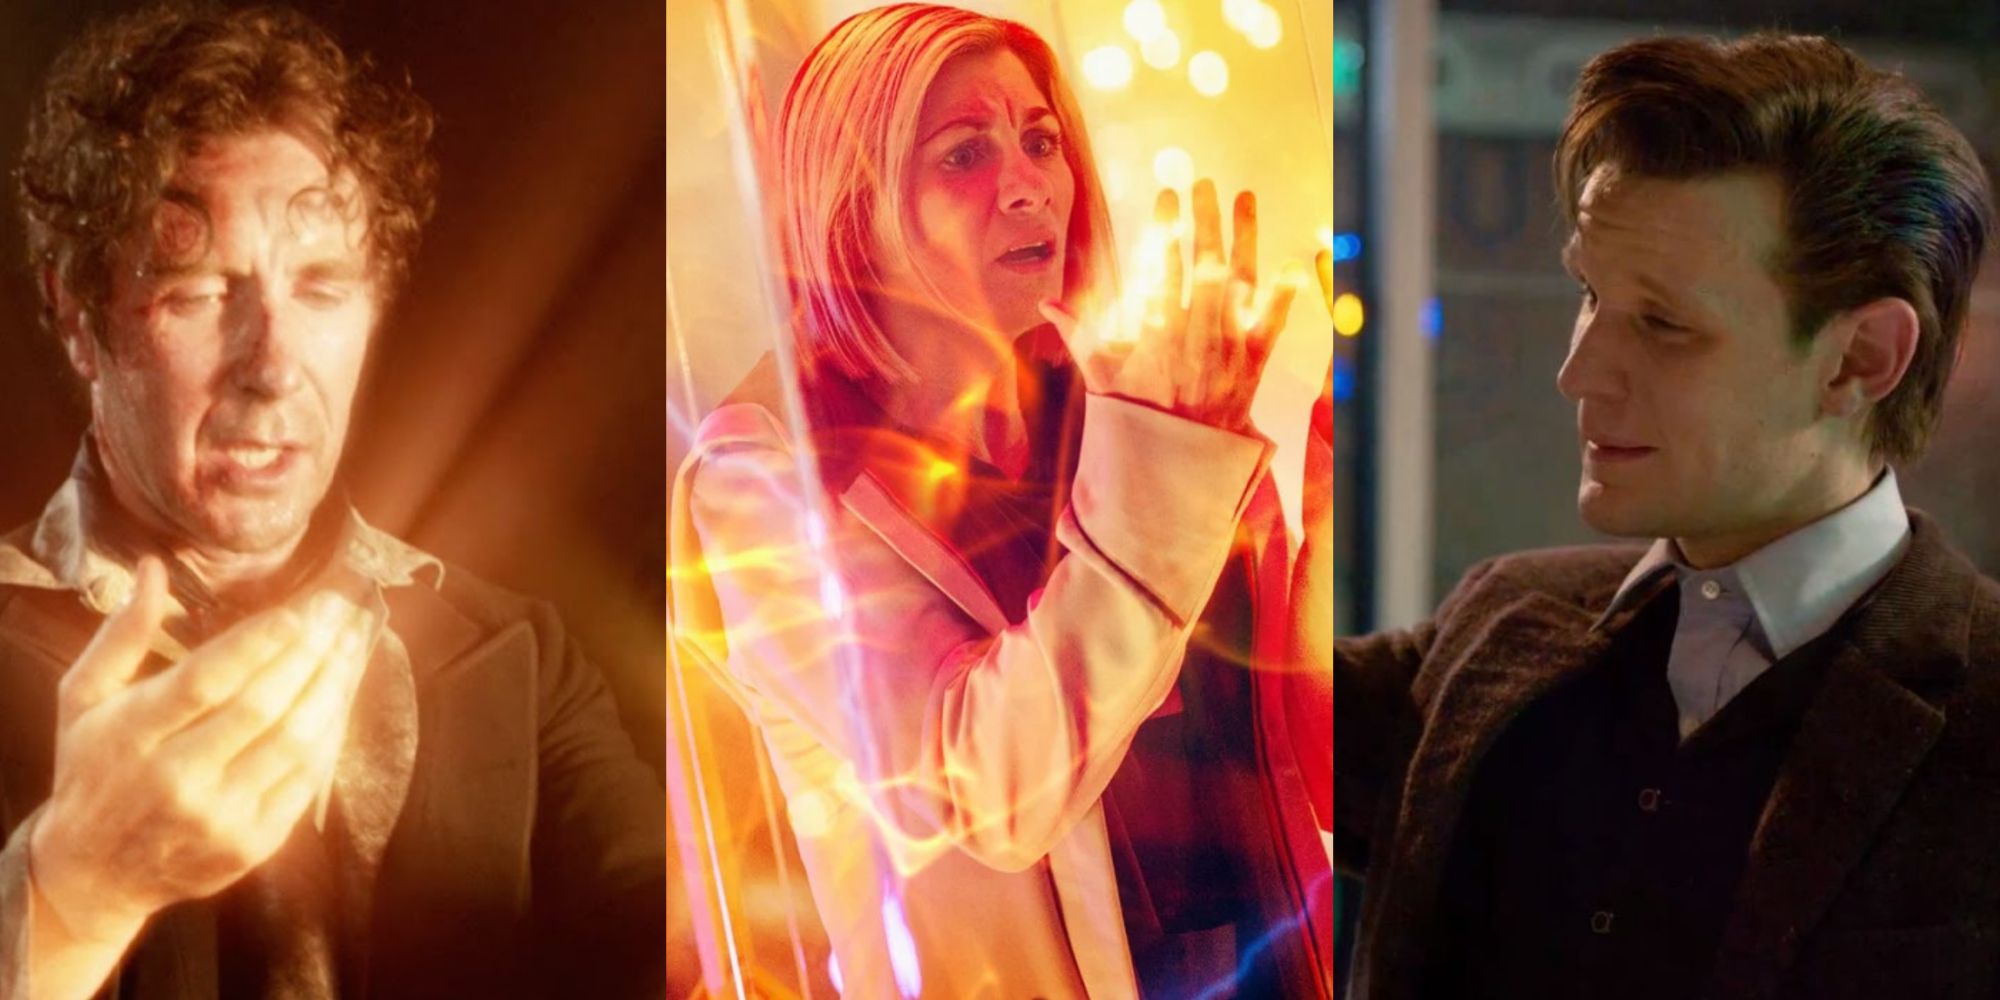 The Eighth, Thirteenth, and Eleventh Doctors all regenerate